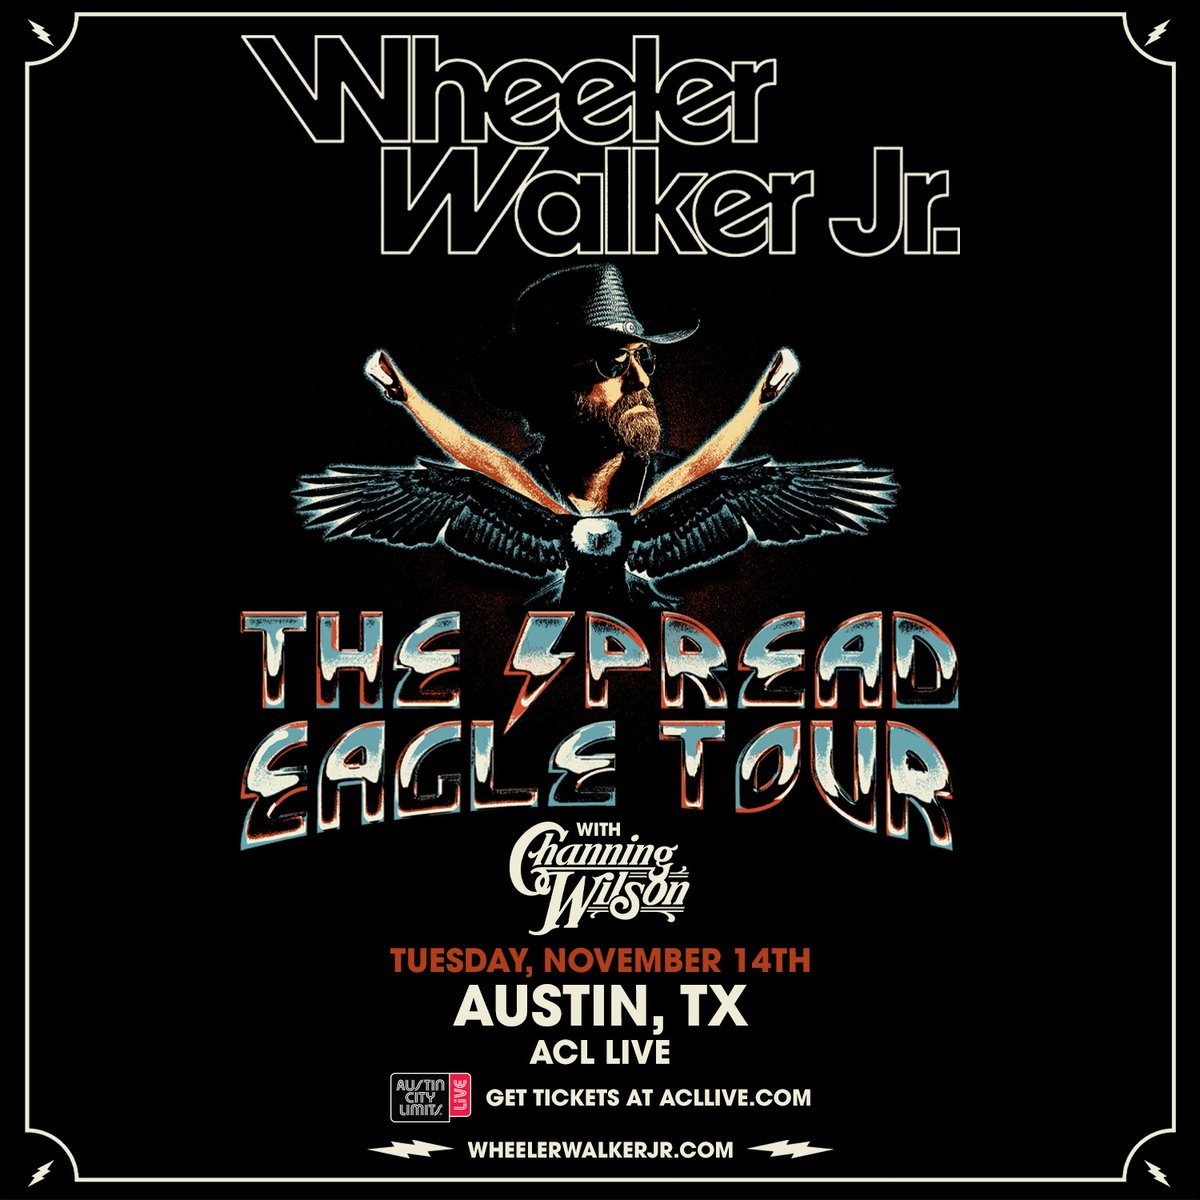 Tonight, Wheeler Walker Jr. is at ACL Live 🤠 6:30PM - Doors 8:00PM - @ChanningWilson 9:00PM - Wheeler Walker Jr. 🎟️ : Get tickets to the show at opryent.co/49B2pcs See you there!